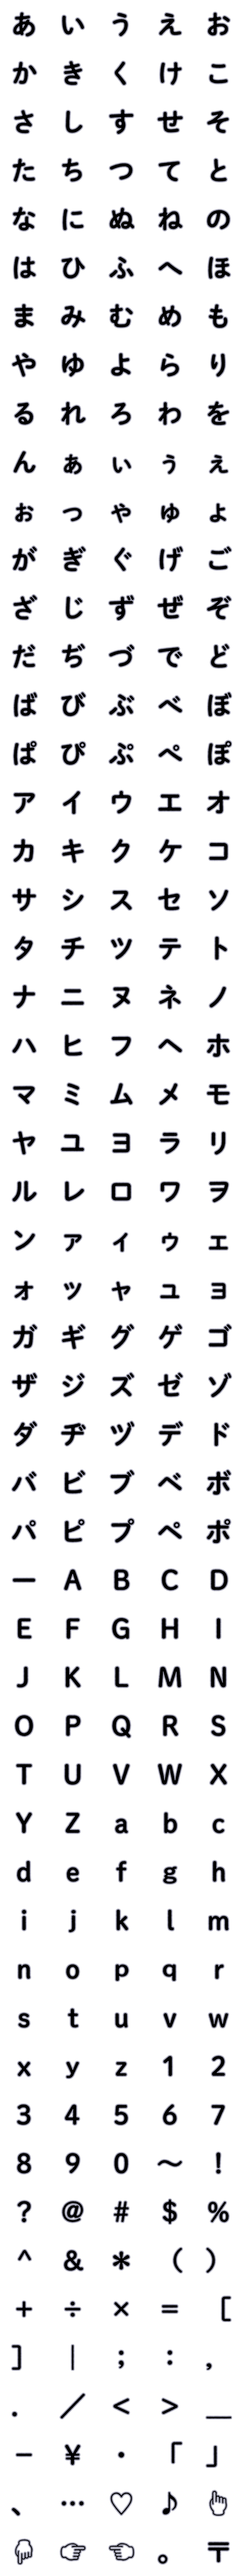 [LINE絵文字]秀英体でデコ文字「秀英にじみ丸ゴ B」の画像一覧